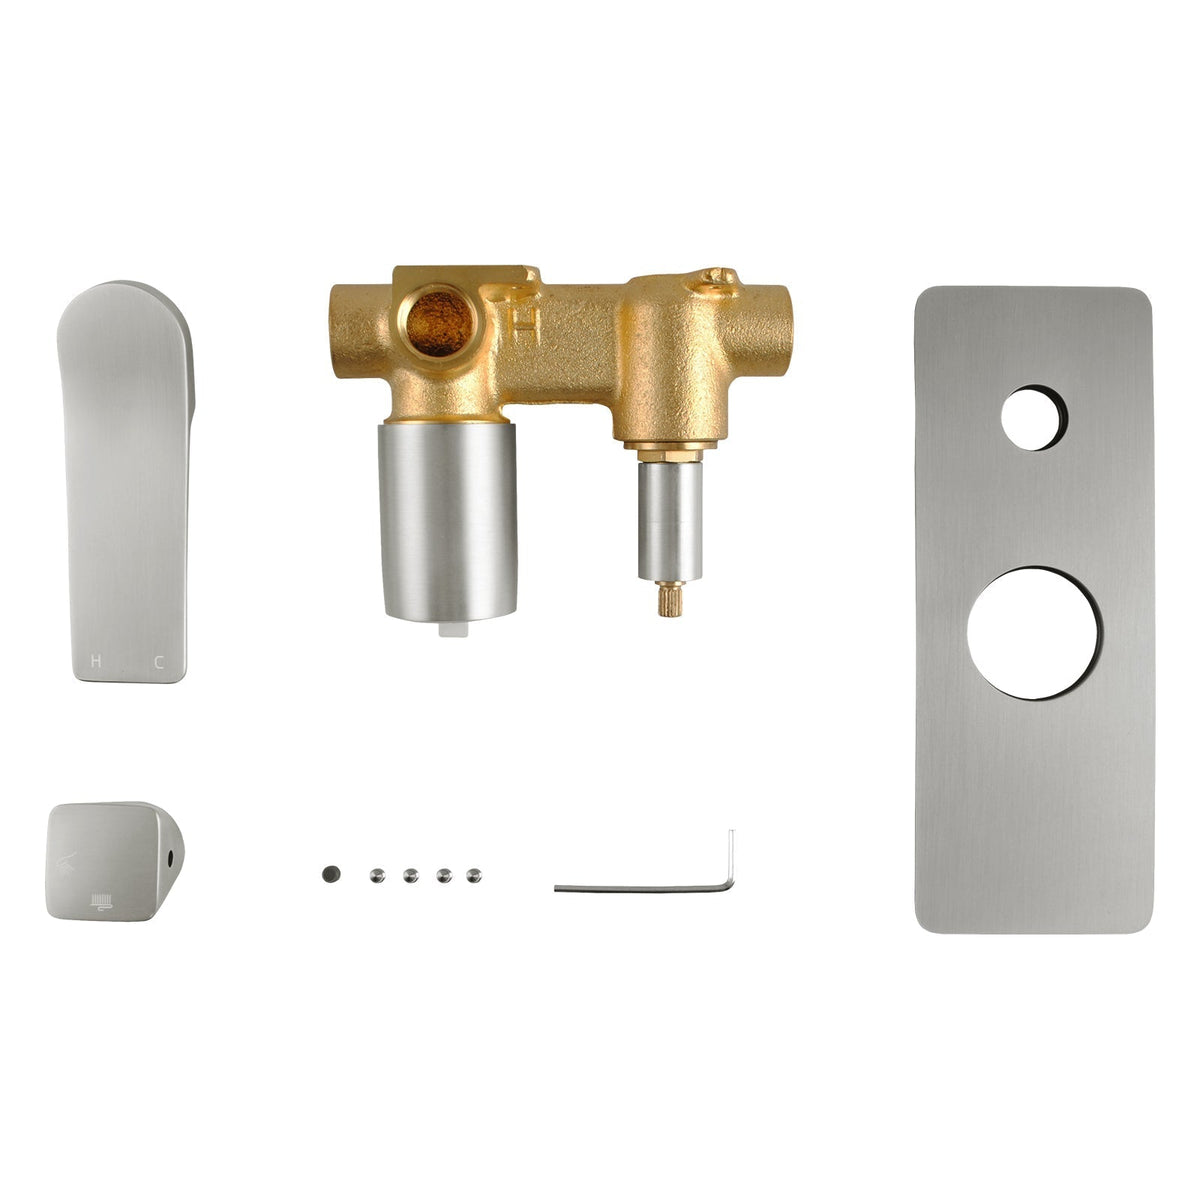 RUSHY Square Brushed Nickel Wall Mixer With Diverter